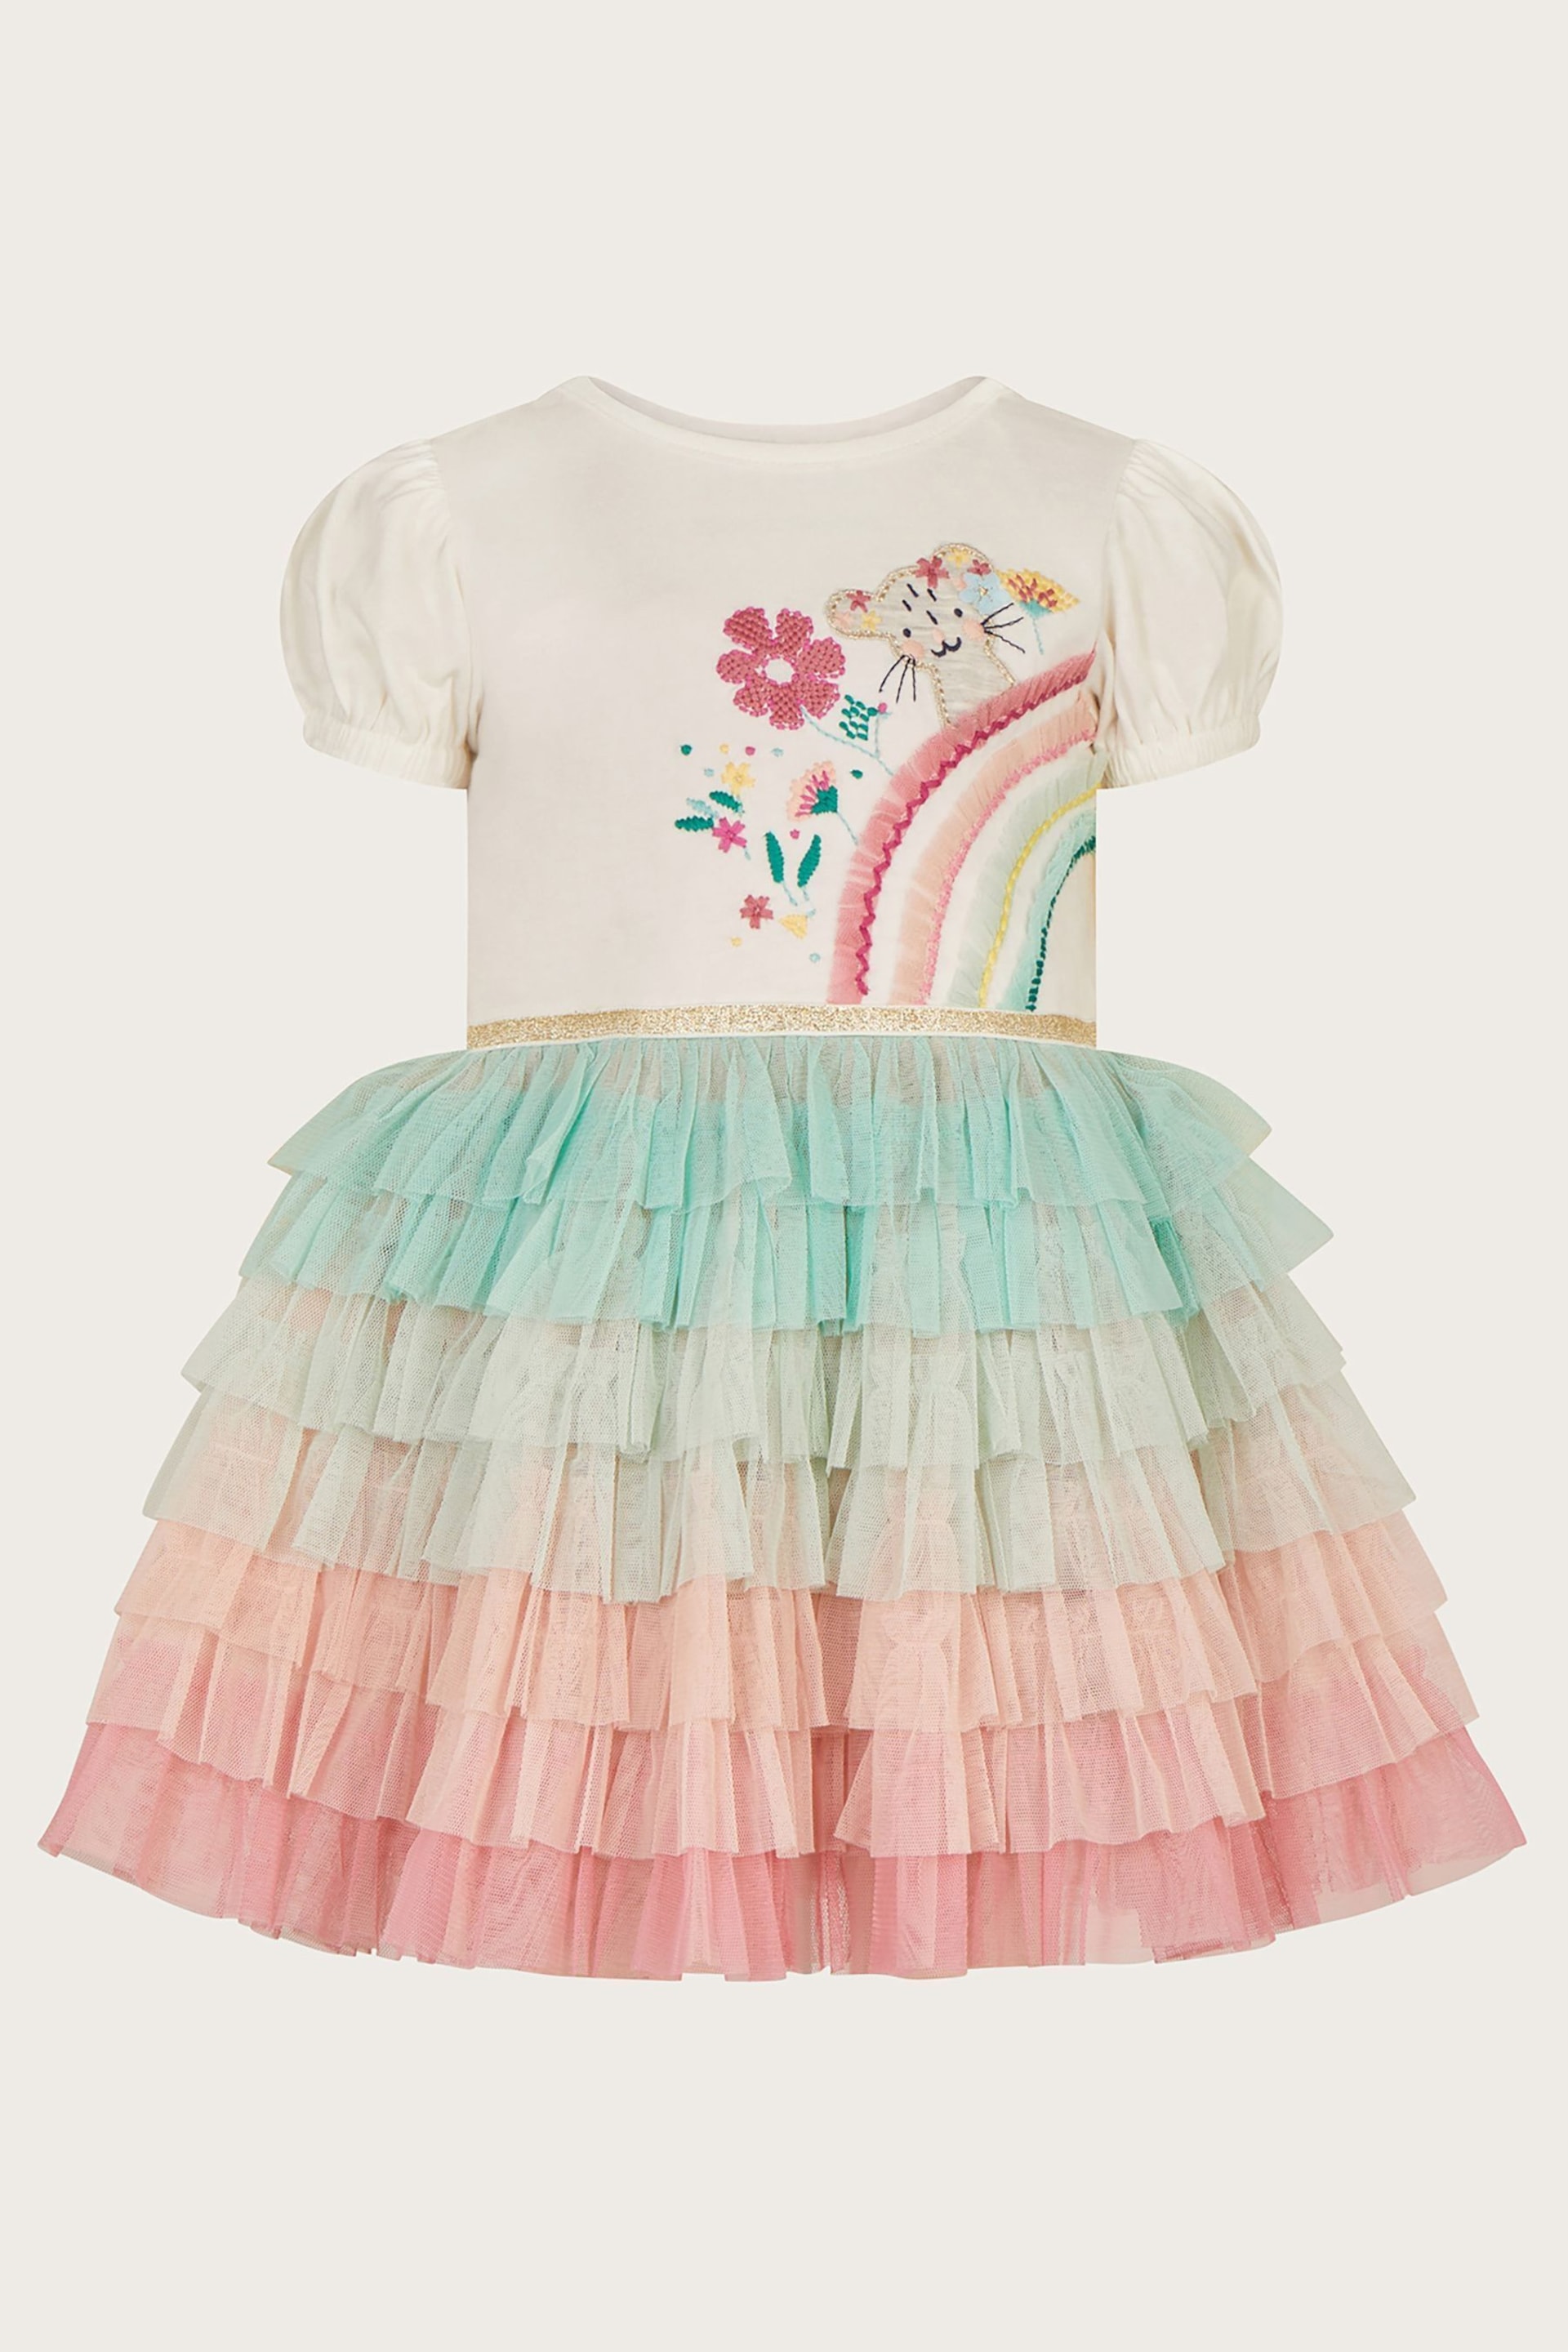 Monsoon Natural Baby Disco Mouse Dress - Image 1 of 3